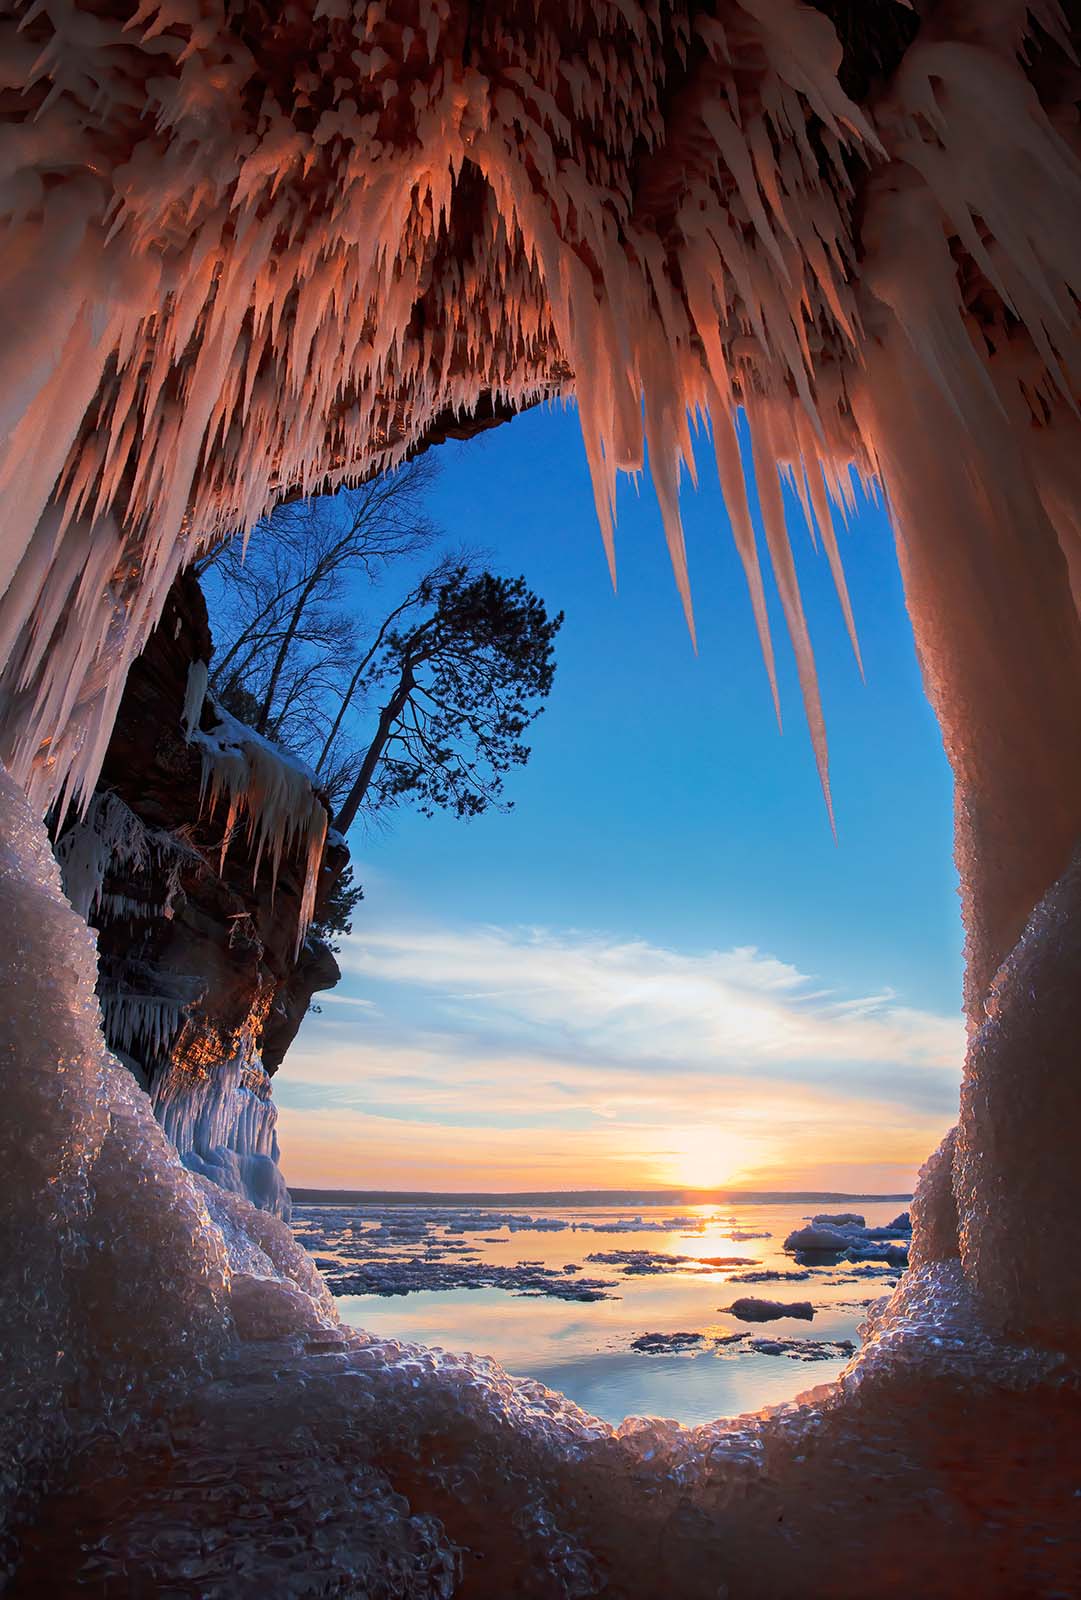 sunset through an ice cave porthole at the apostle islands mainland ice caves